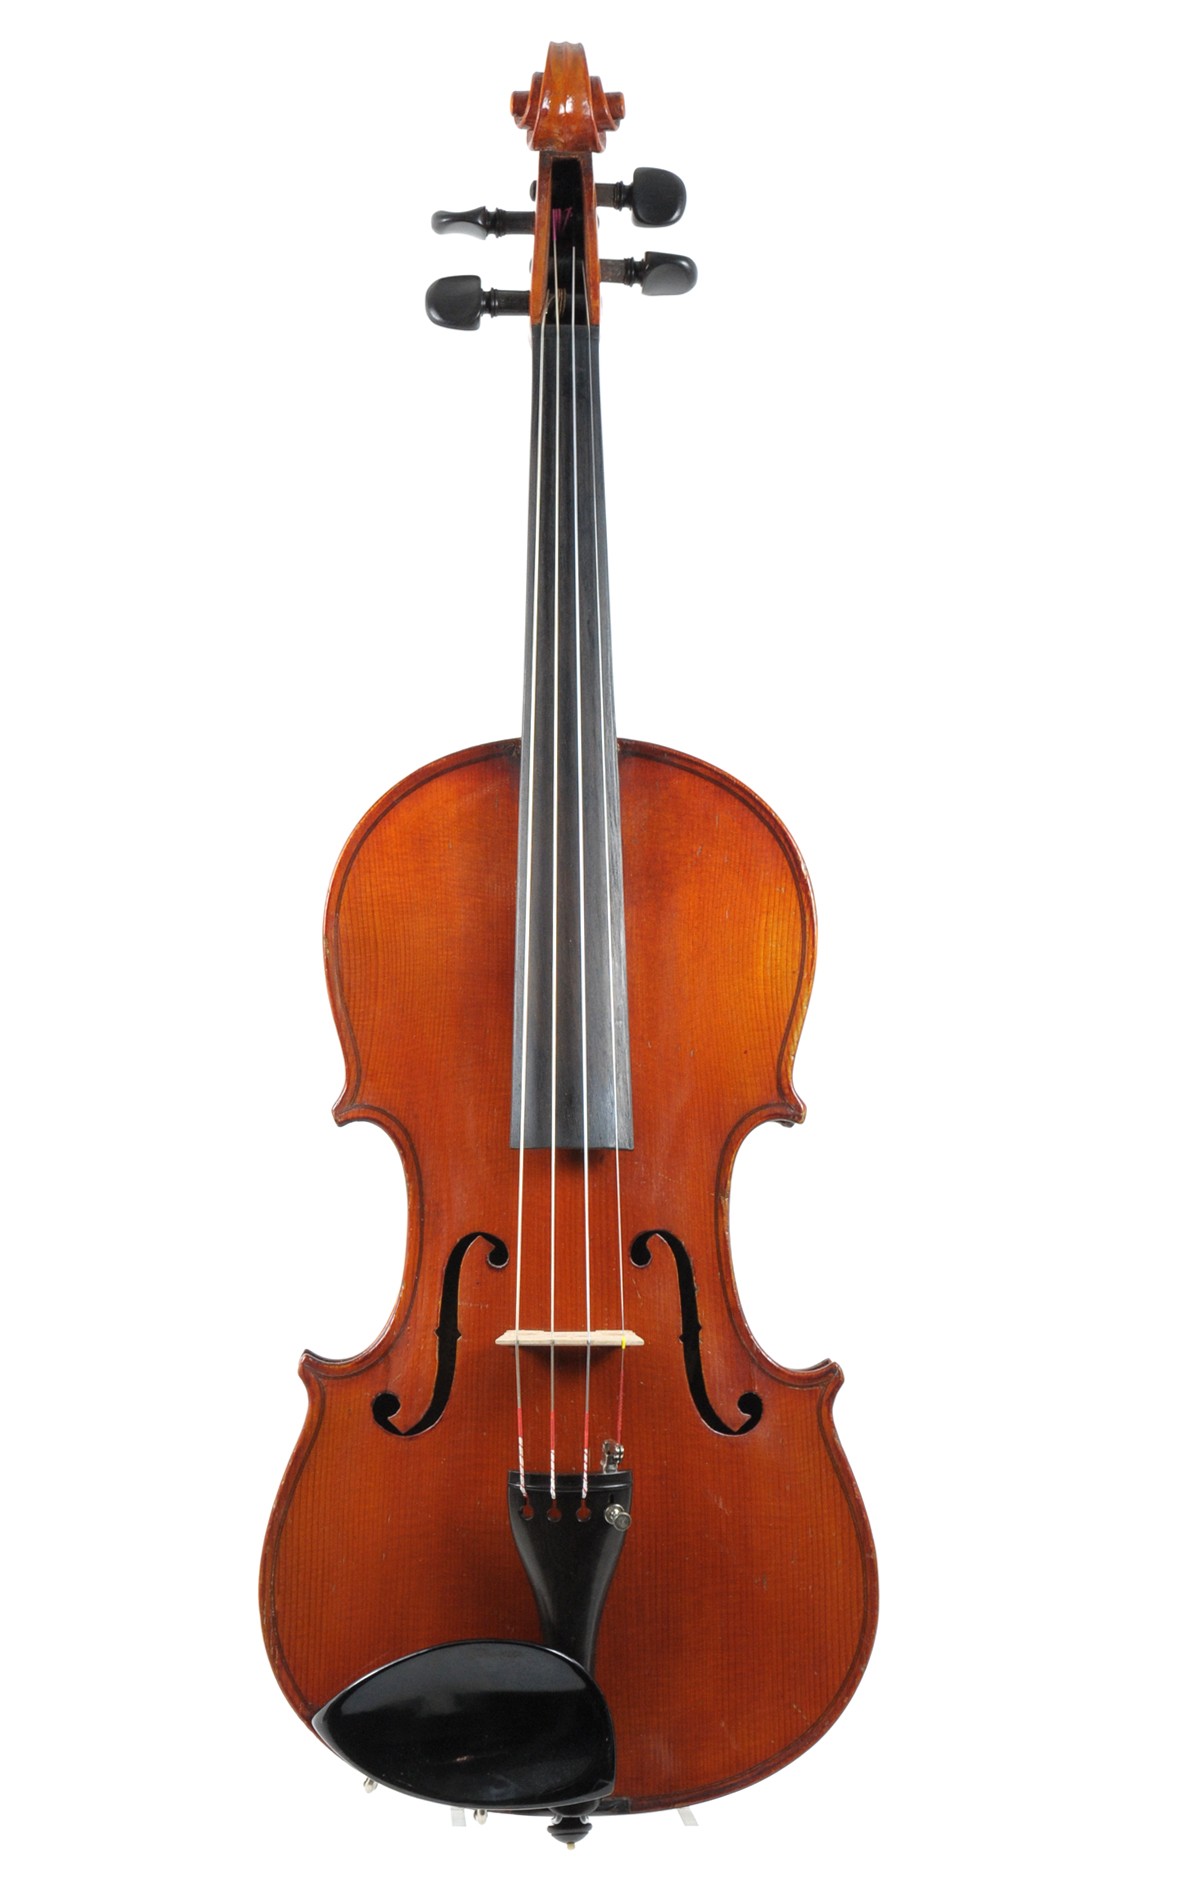 Violin from Saxony,G. C. Urban Cleveland/Ohio label-top